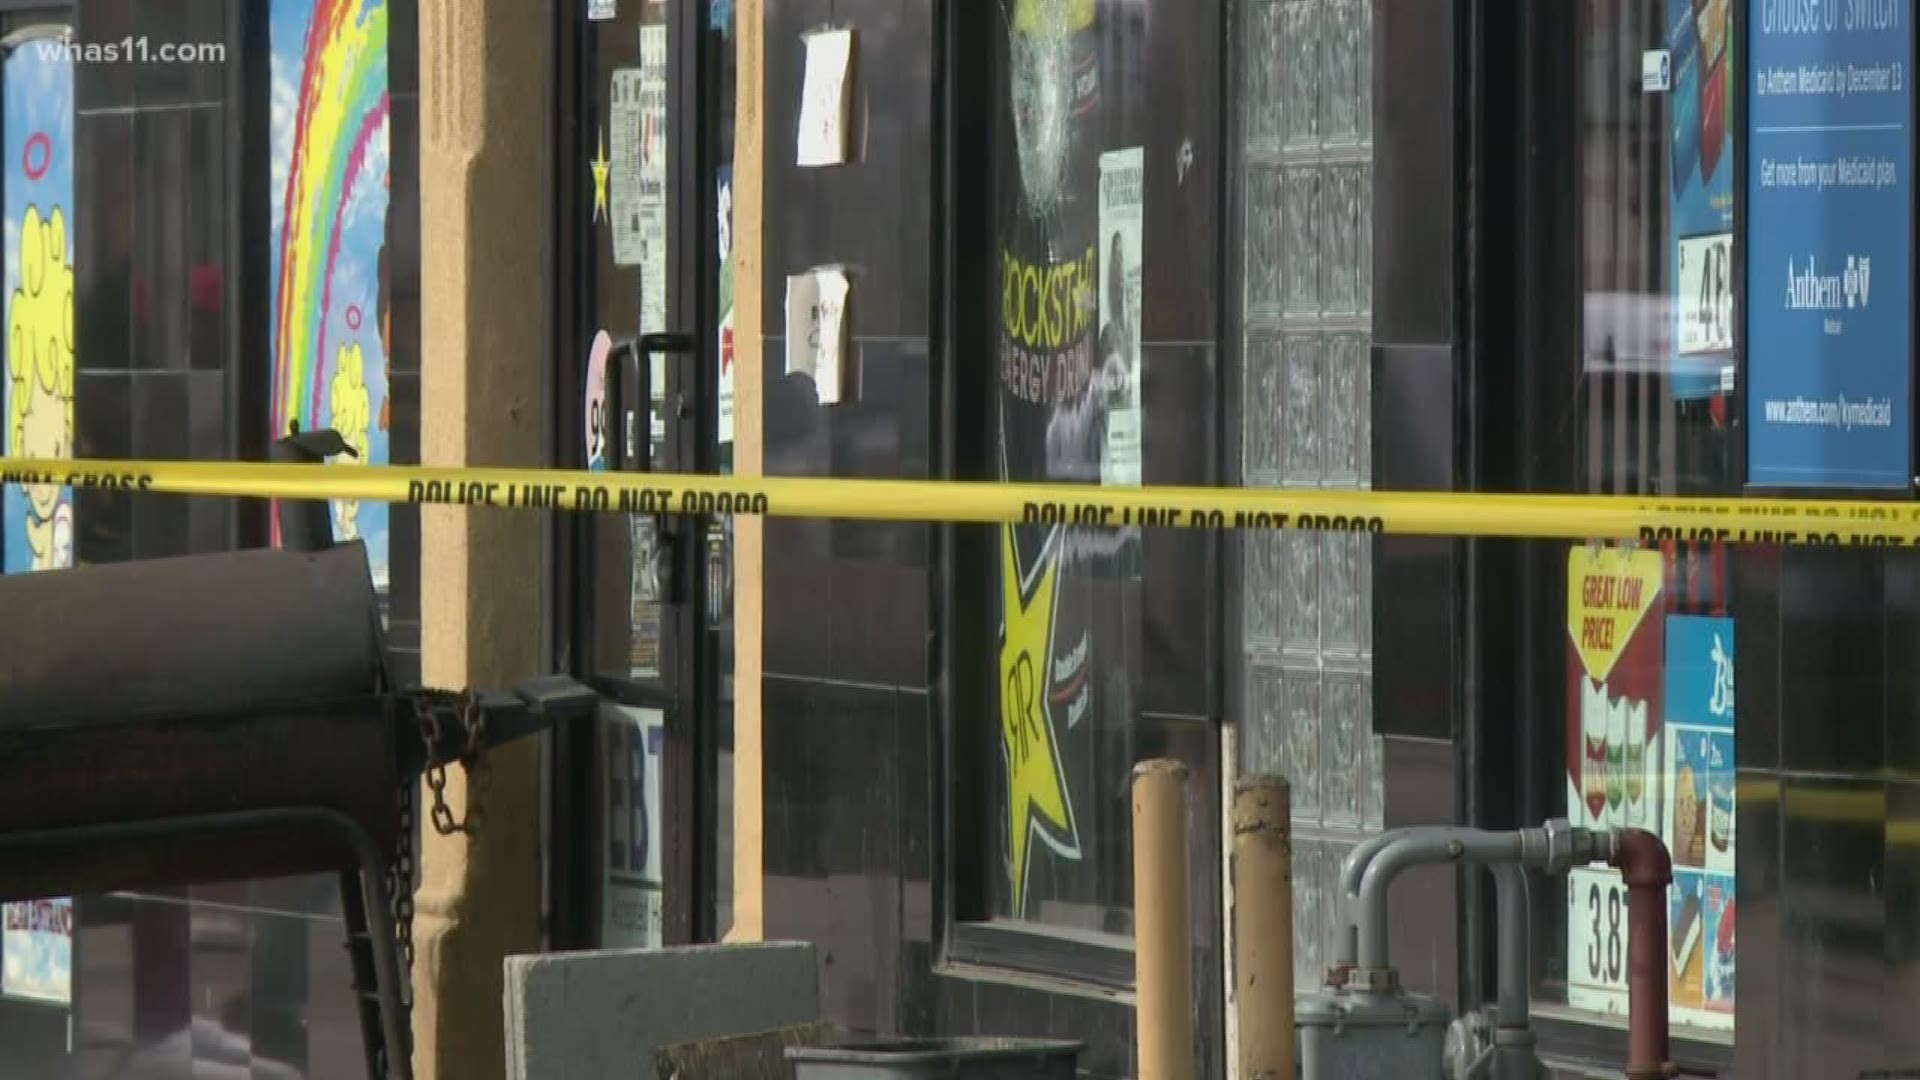 One man was killed following altercation with store employee.